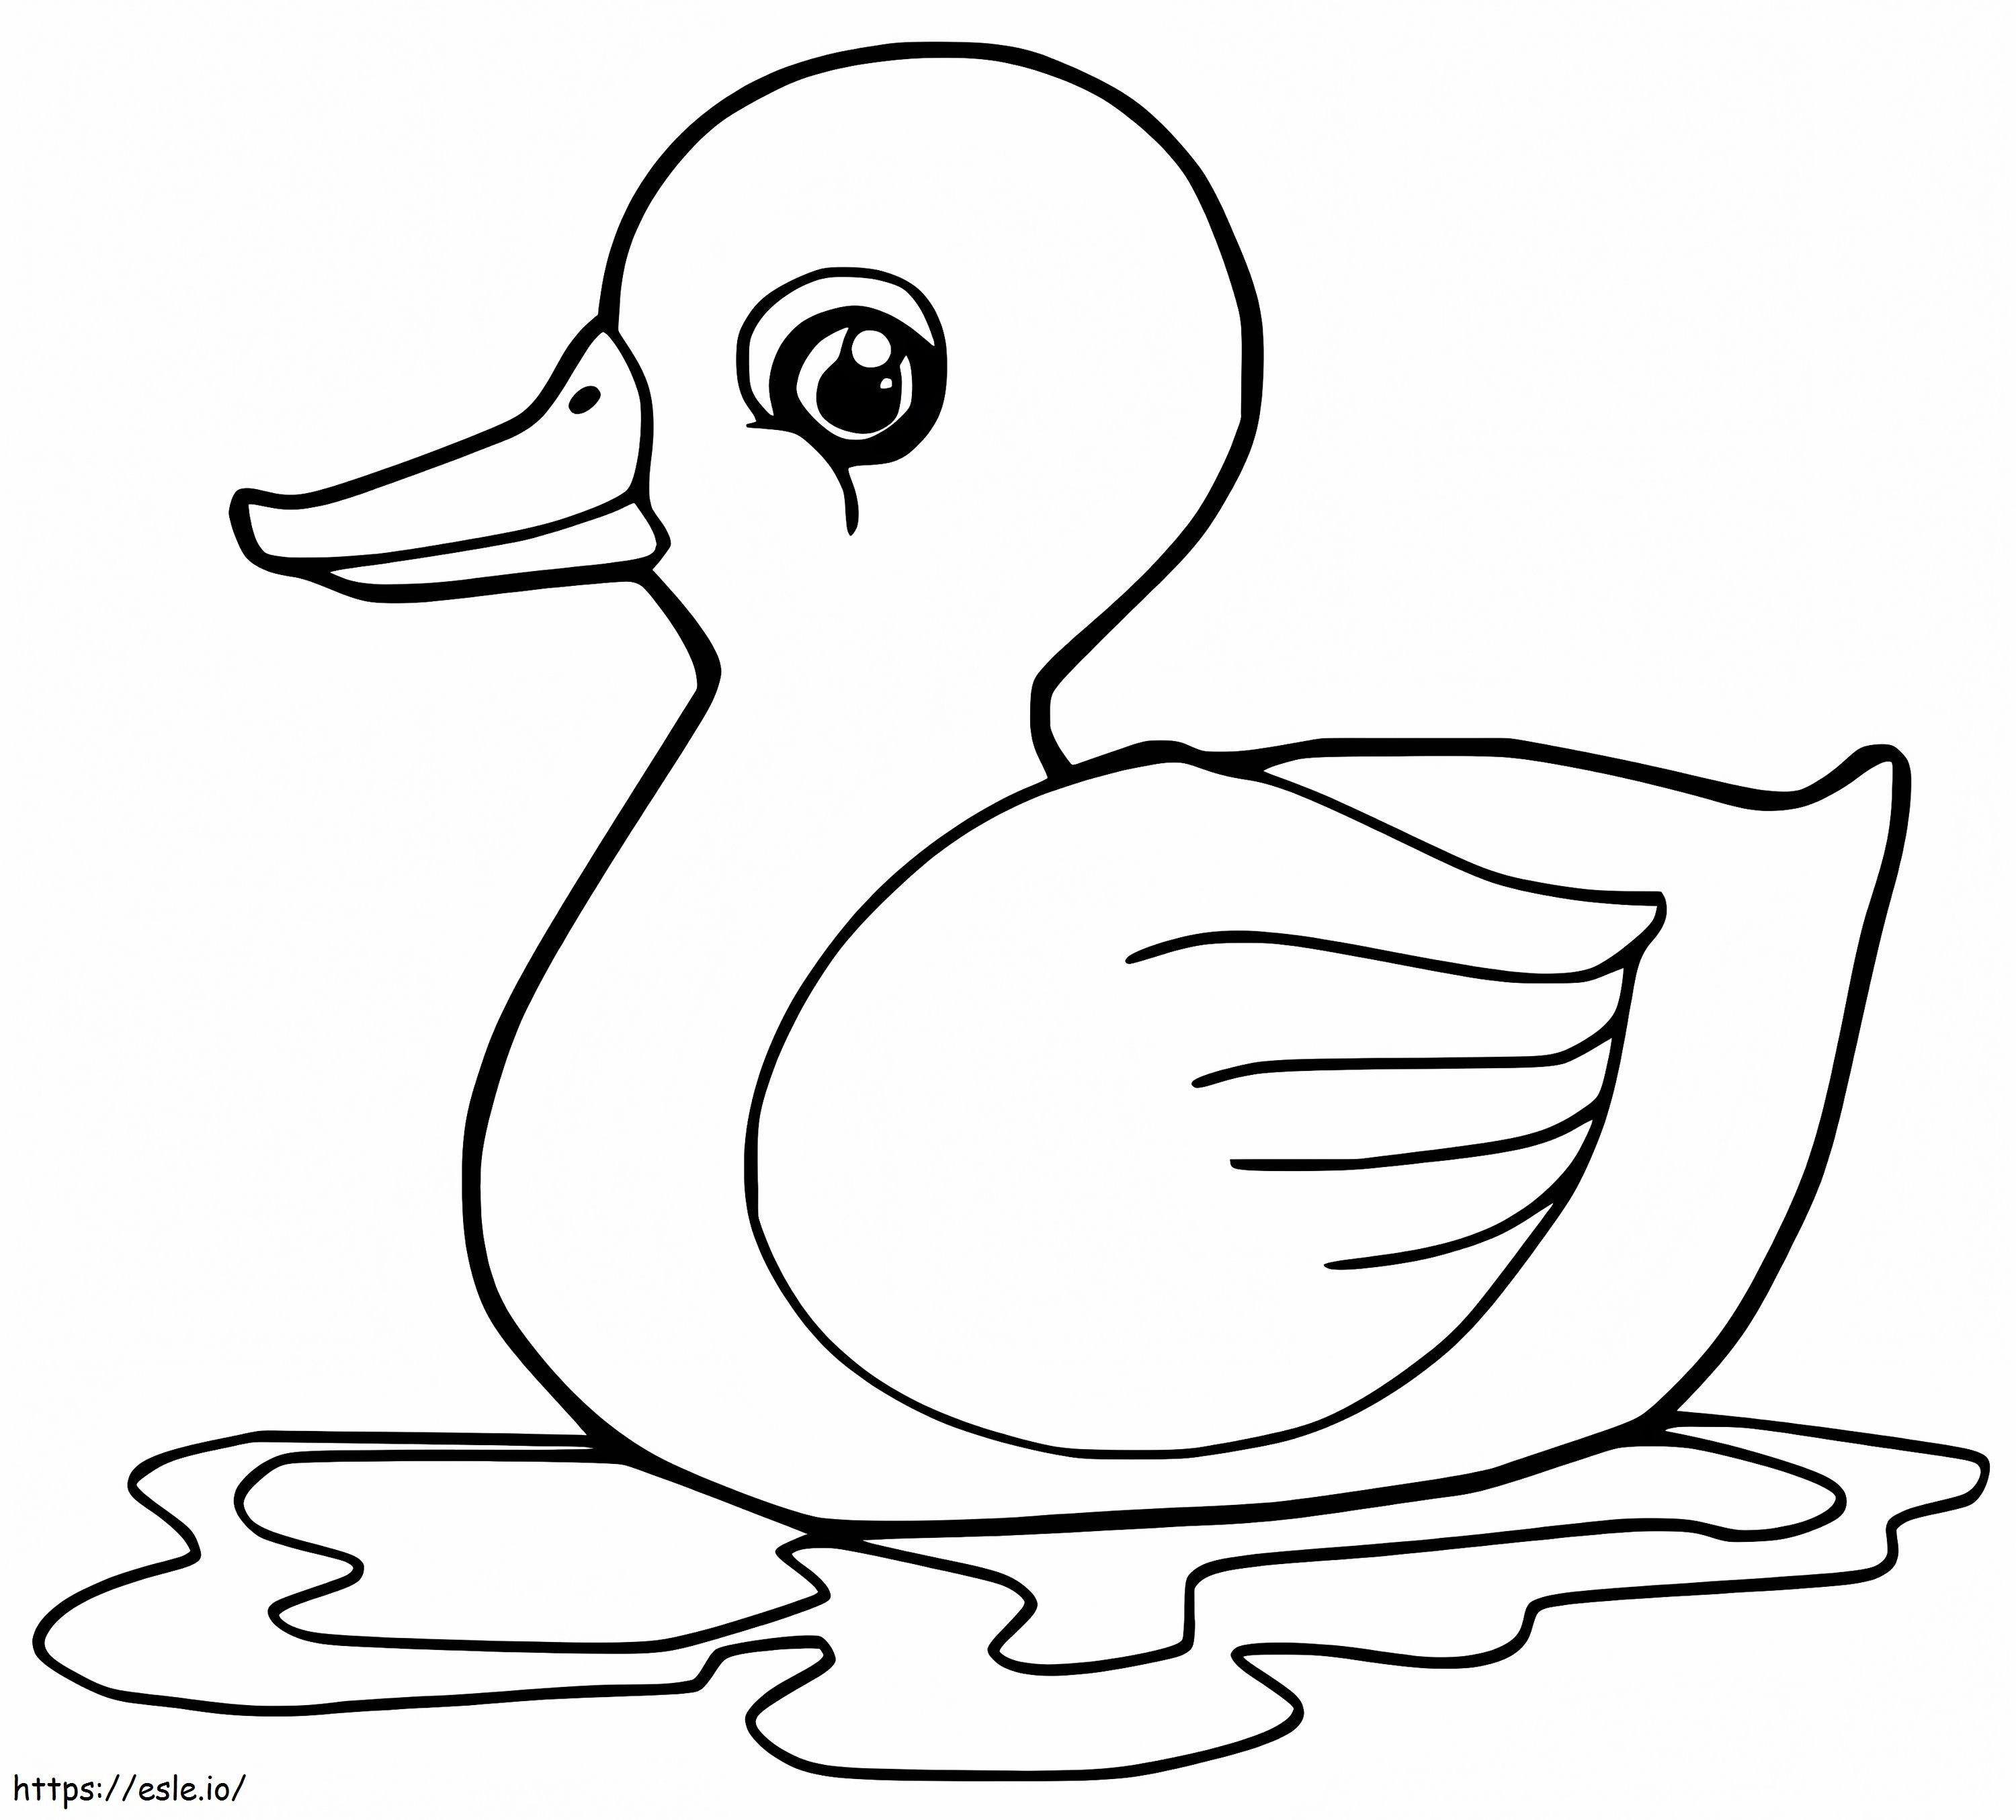 Lovely Duckling coloring page